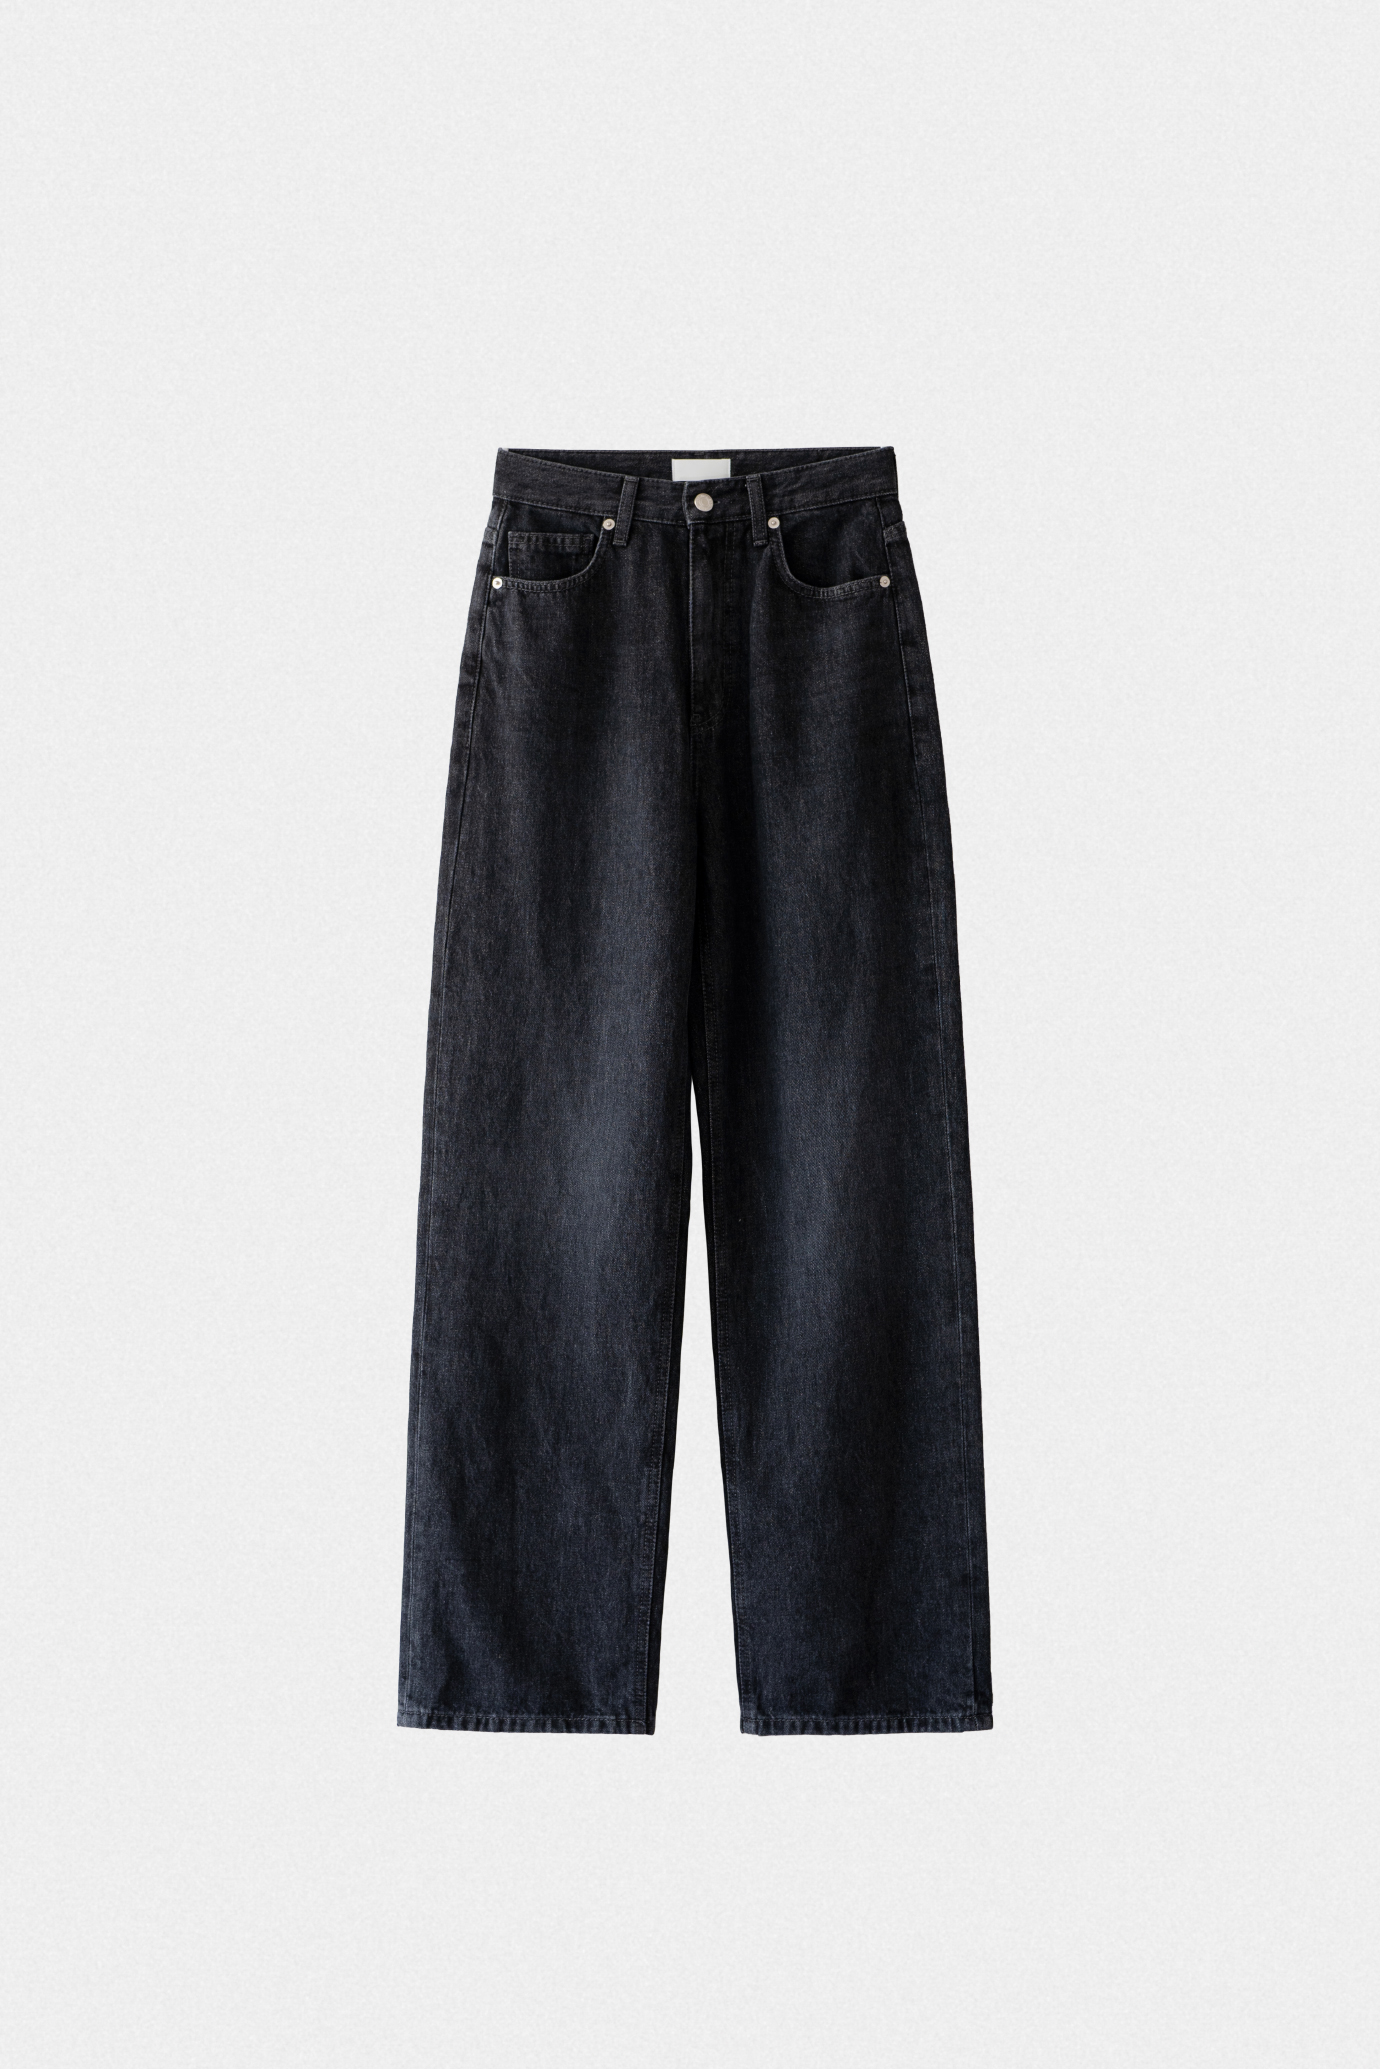 18413_Black Fading Jeans